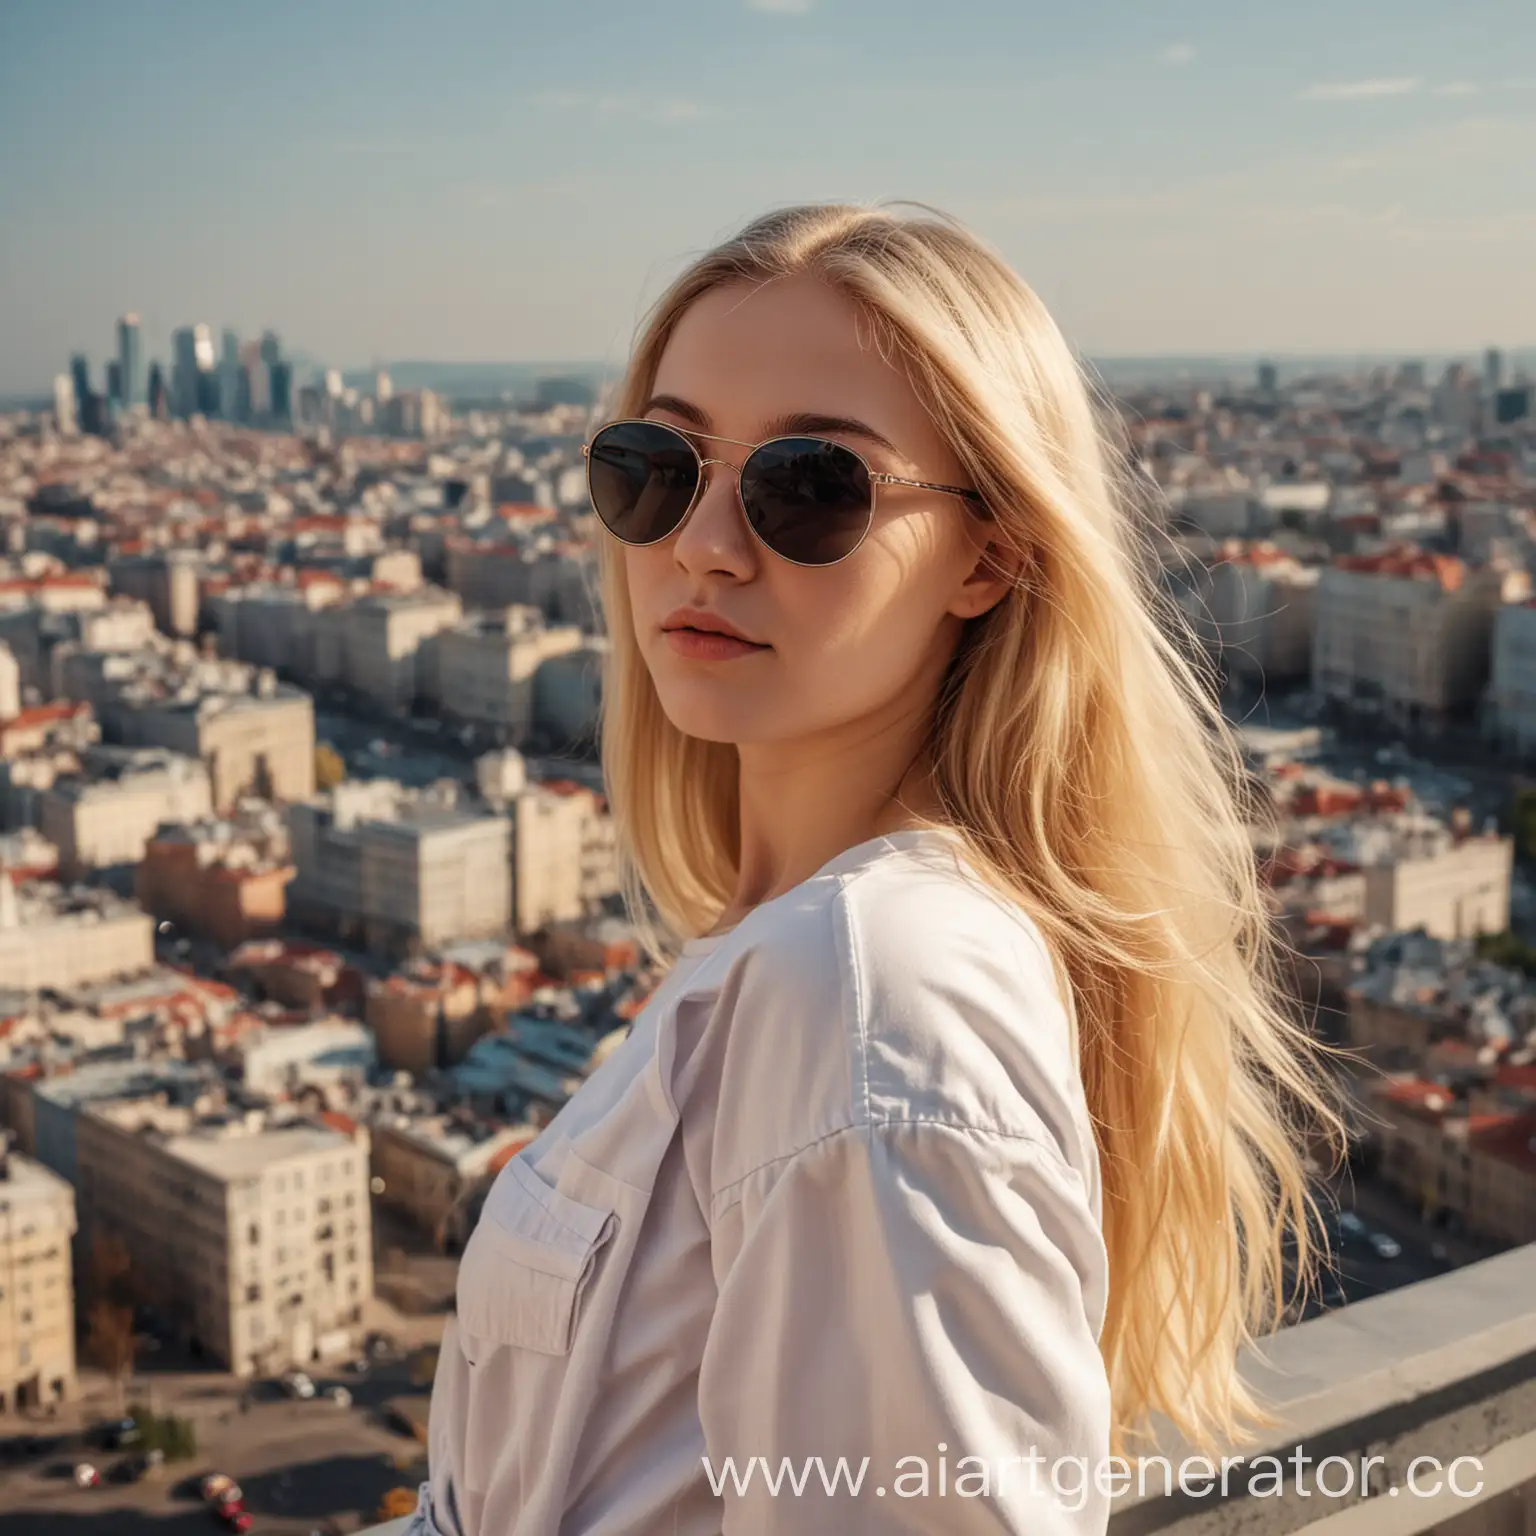 Stylish-Blonde-Girl-in-SunProtection-Glasses-Admiring-Cityscape